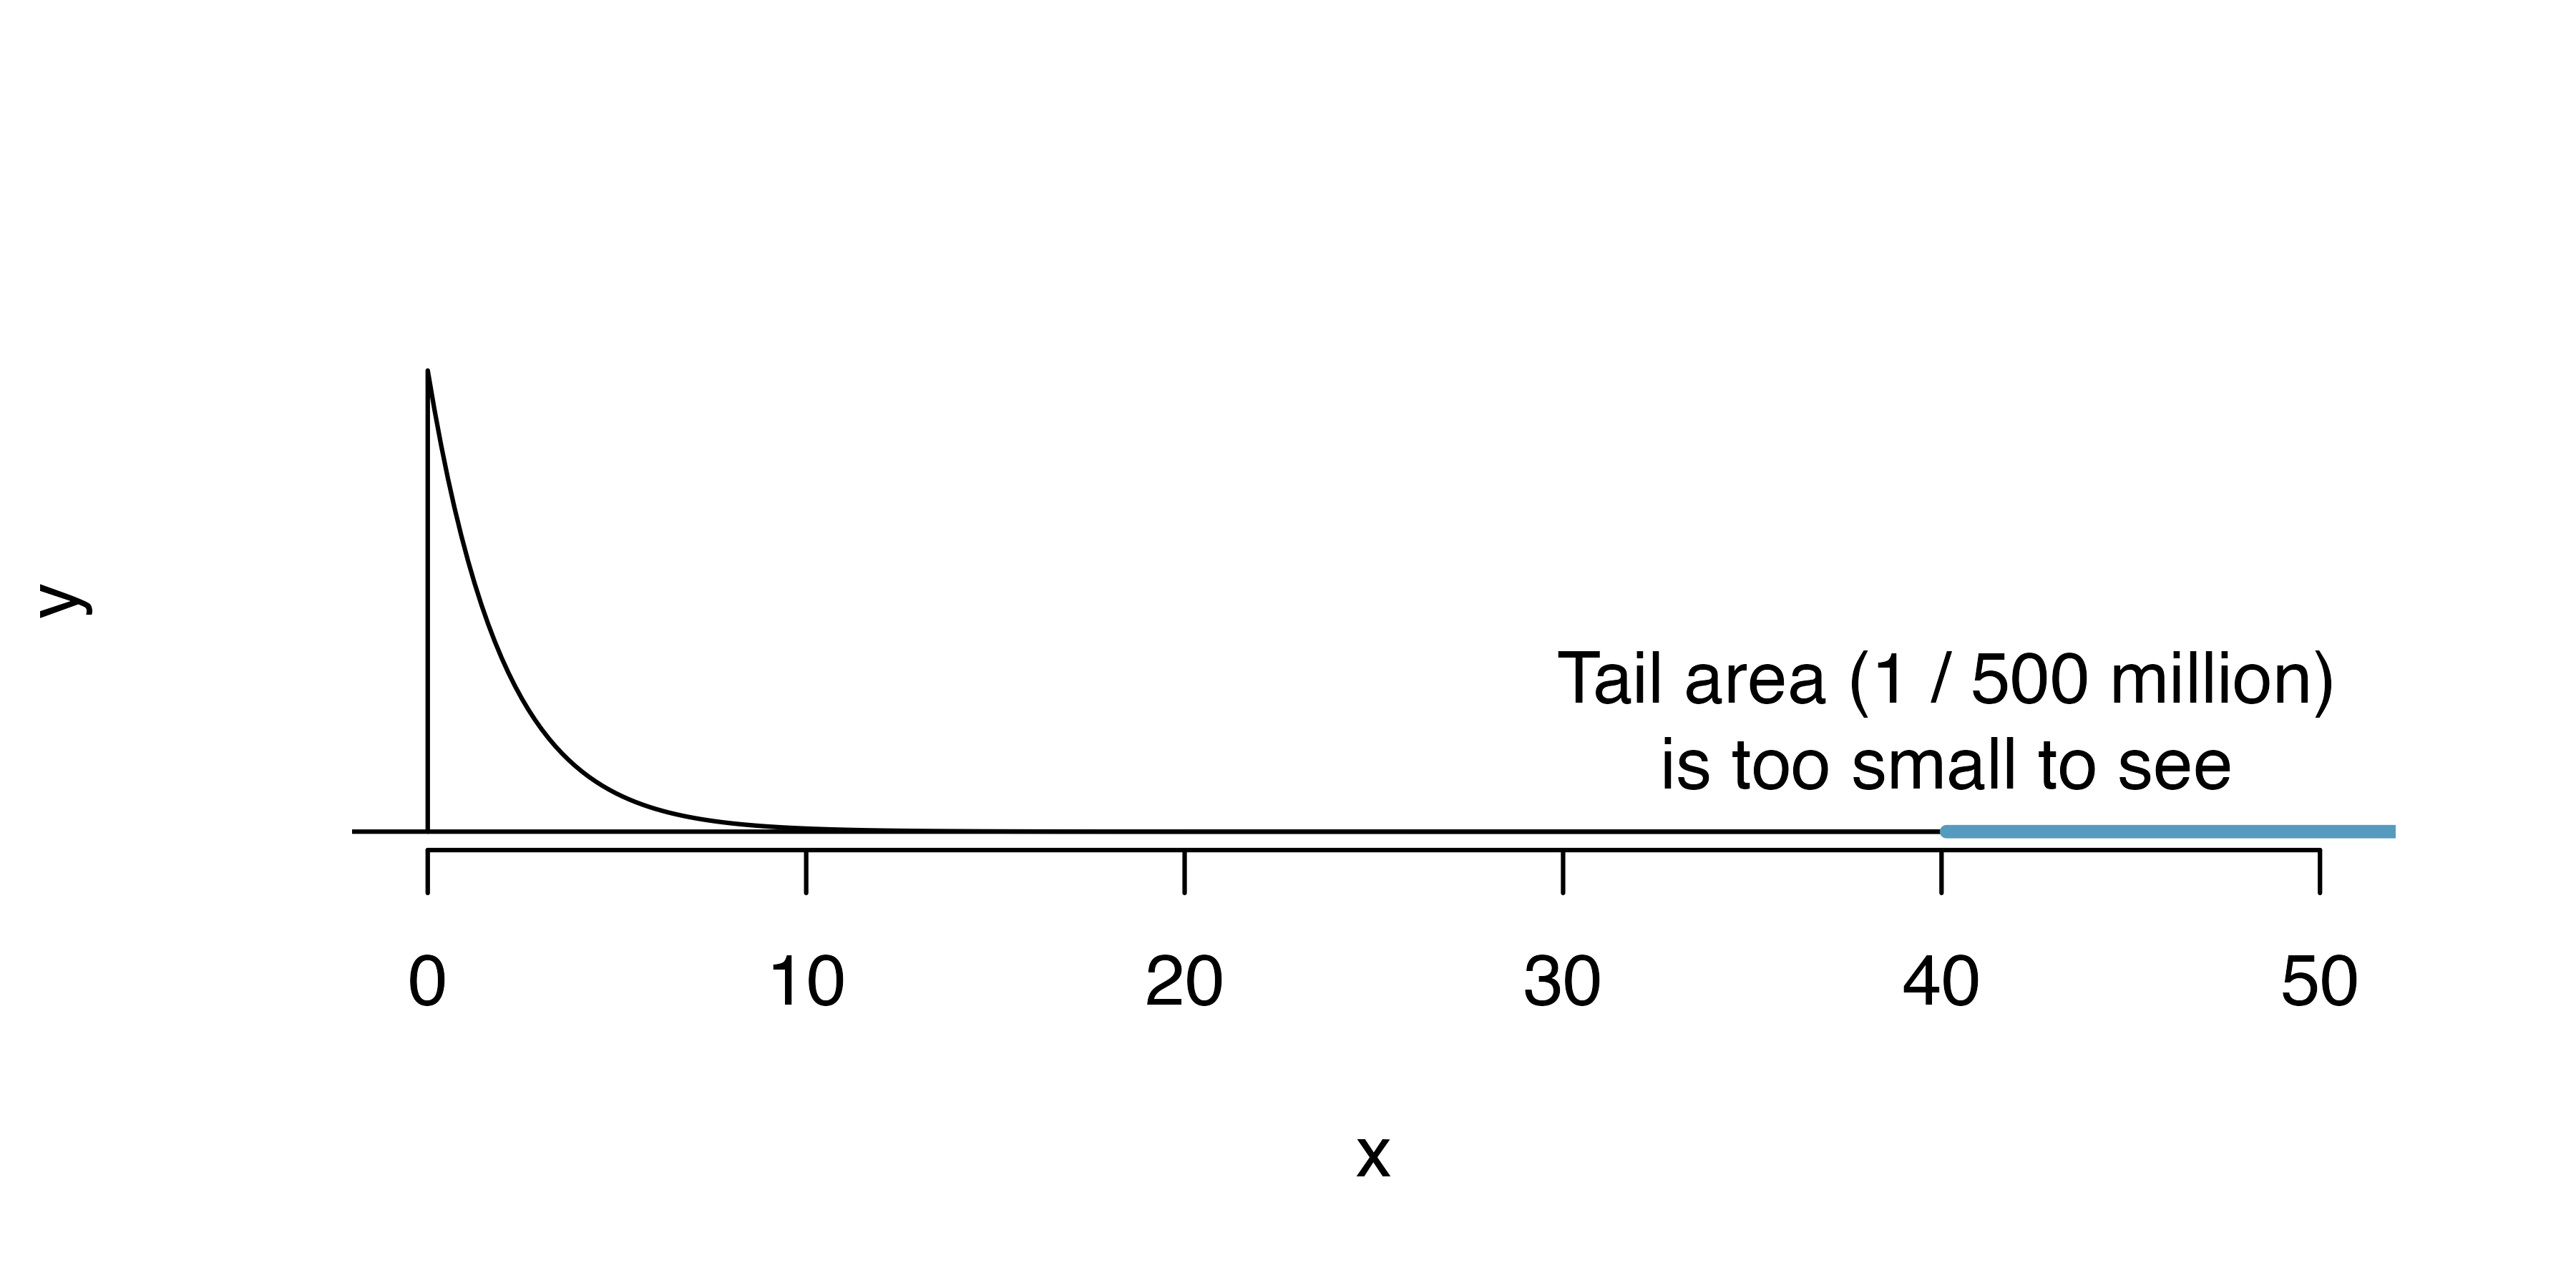 Chi-square distribution (with df = 2) curve, shaded for p-value for X2 = 40.13. The p-value is so small that it is not visible on the plot. 